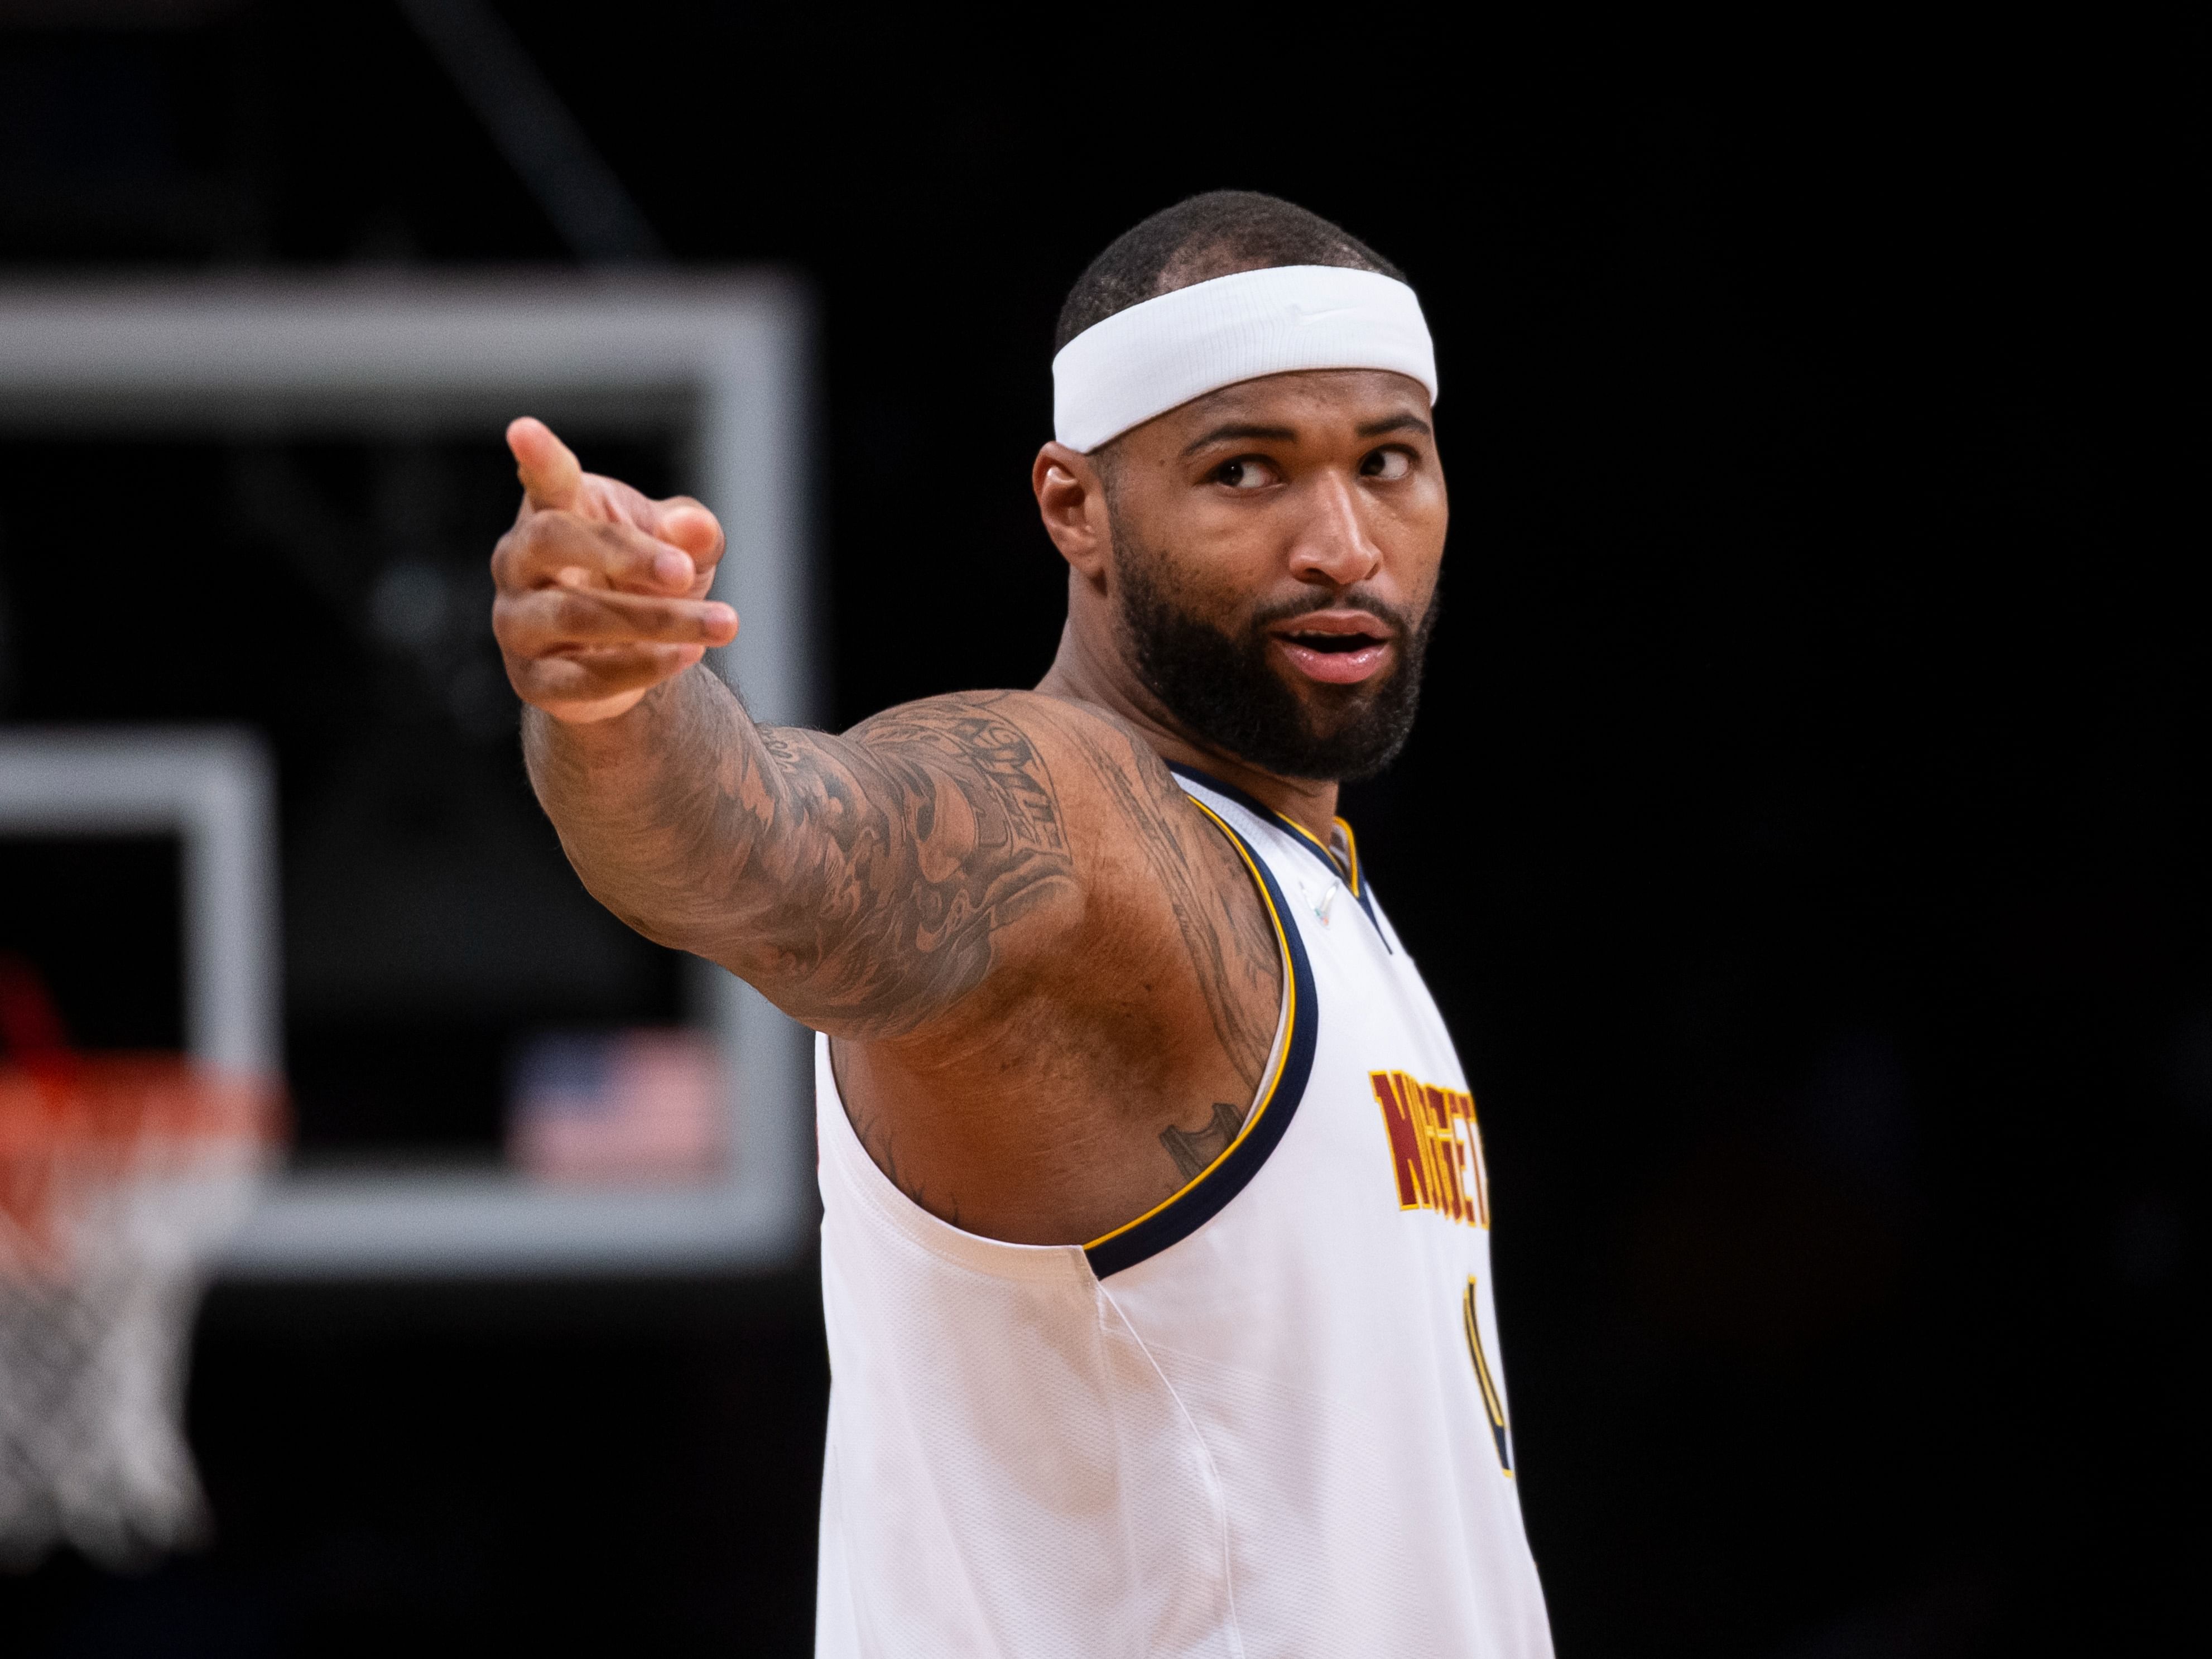 DeMarcus Cousins playing for the Denver Nuggets